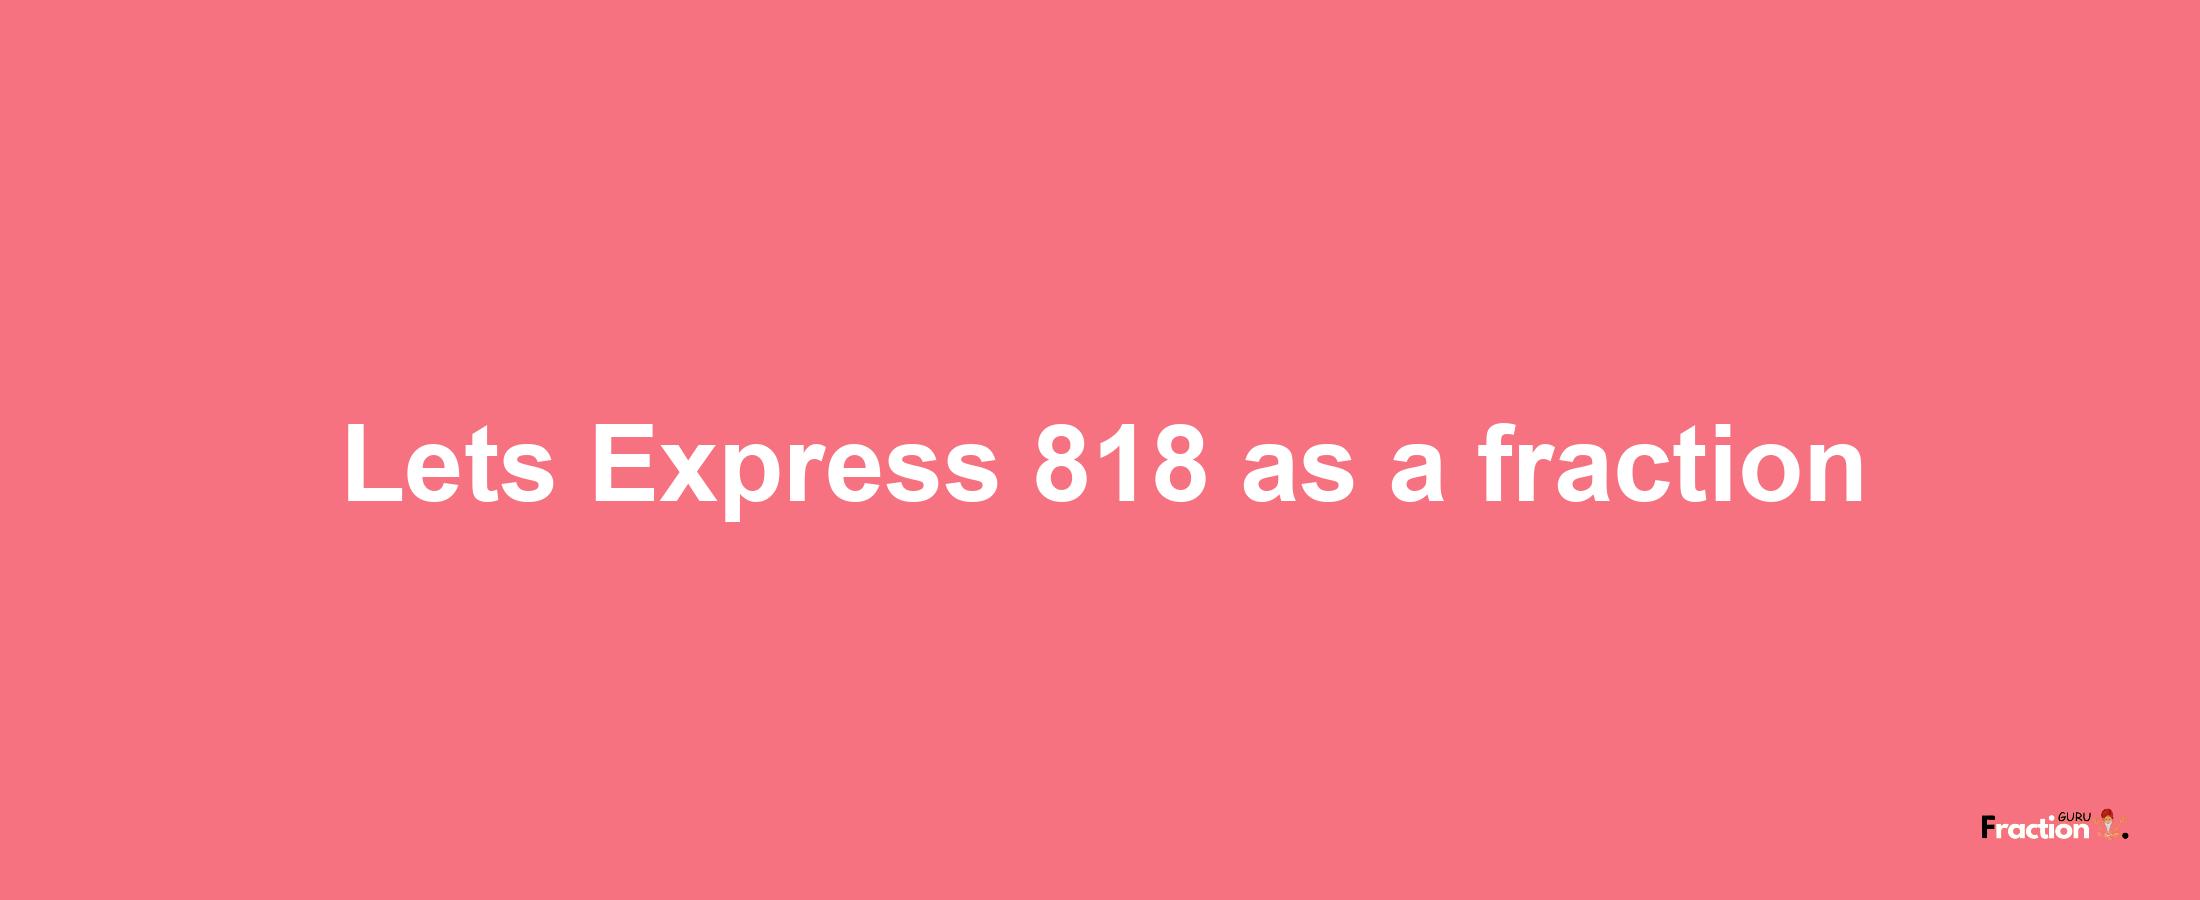 Lets Express 818 as afraction